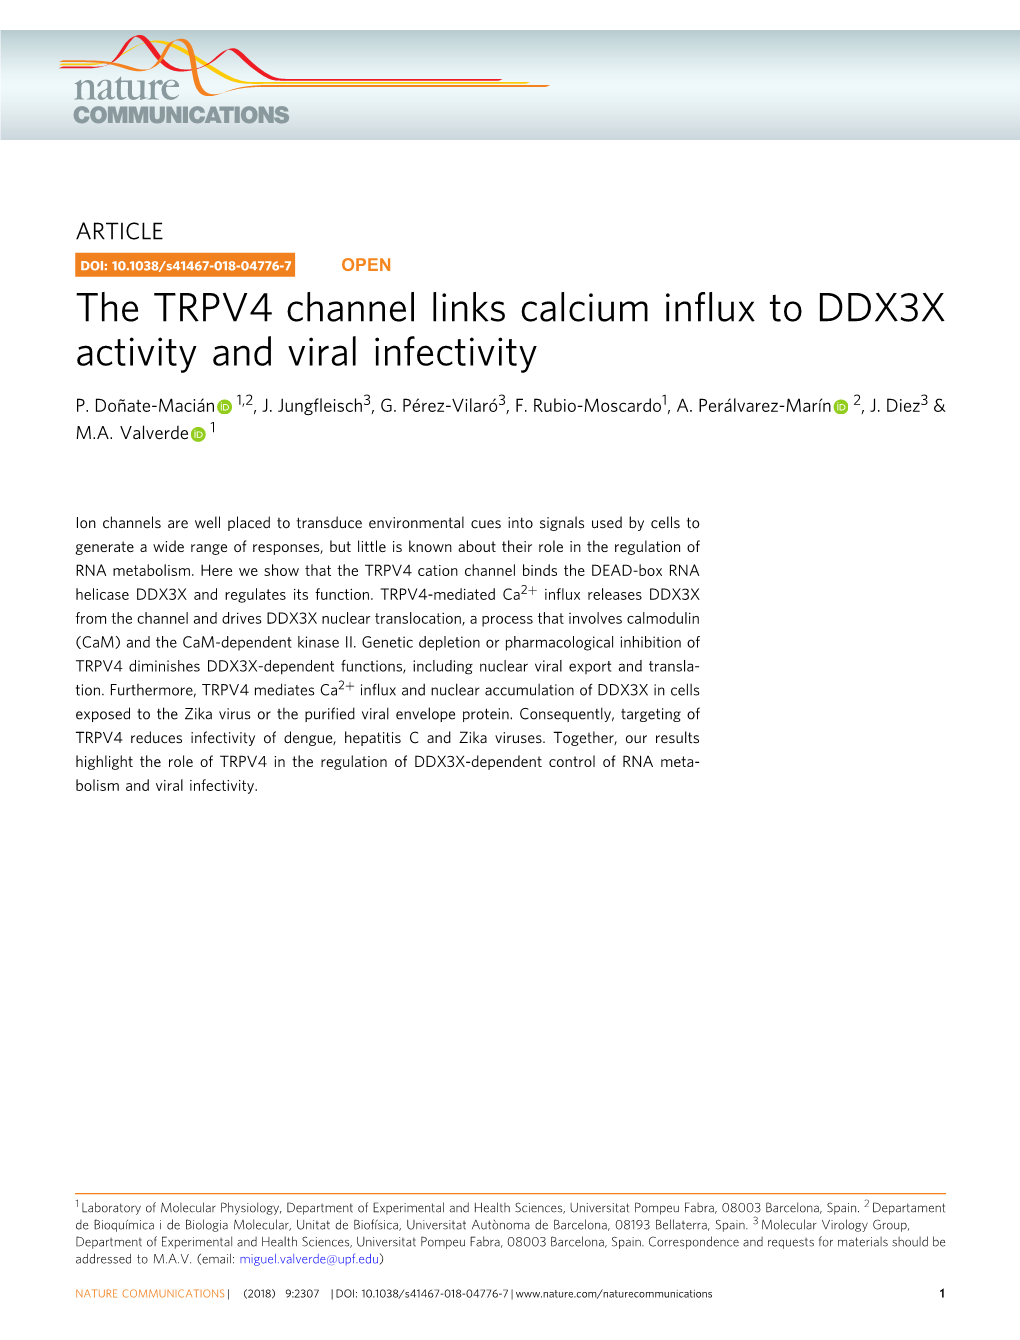 The TRPV4 Channel Links Calcium Influx to DDX3X Activity and Viral